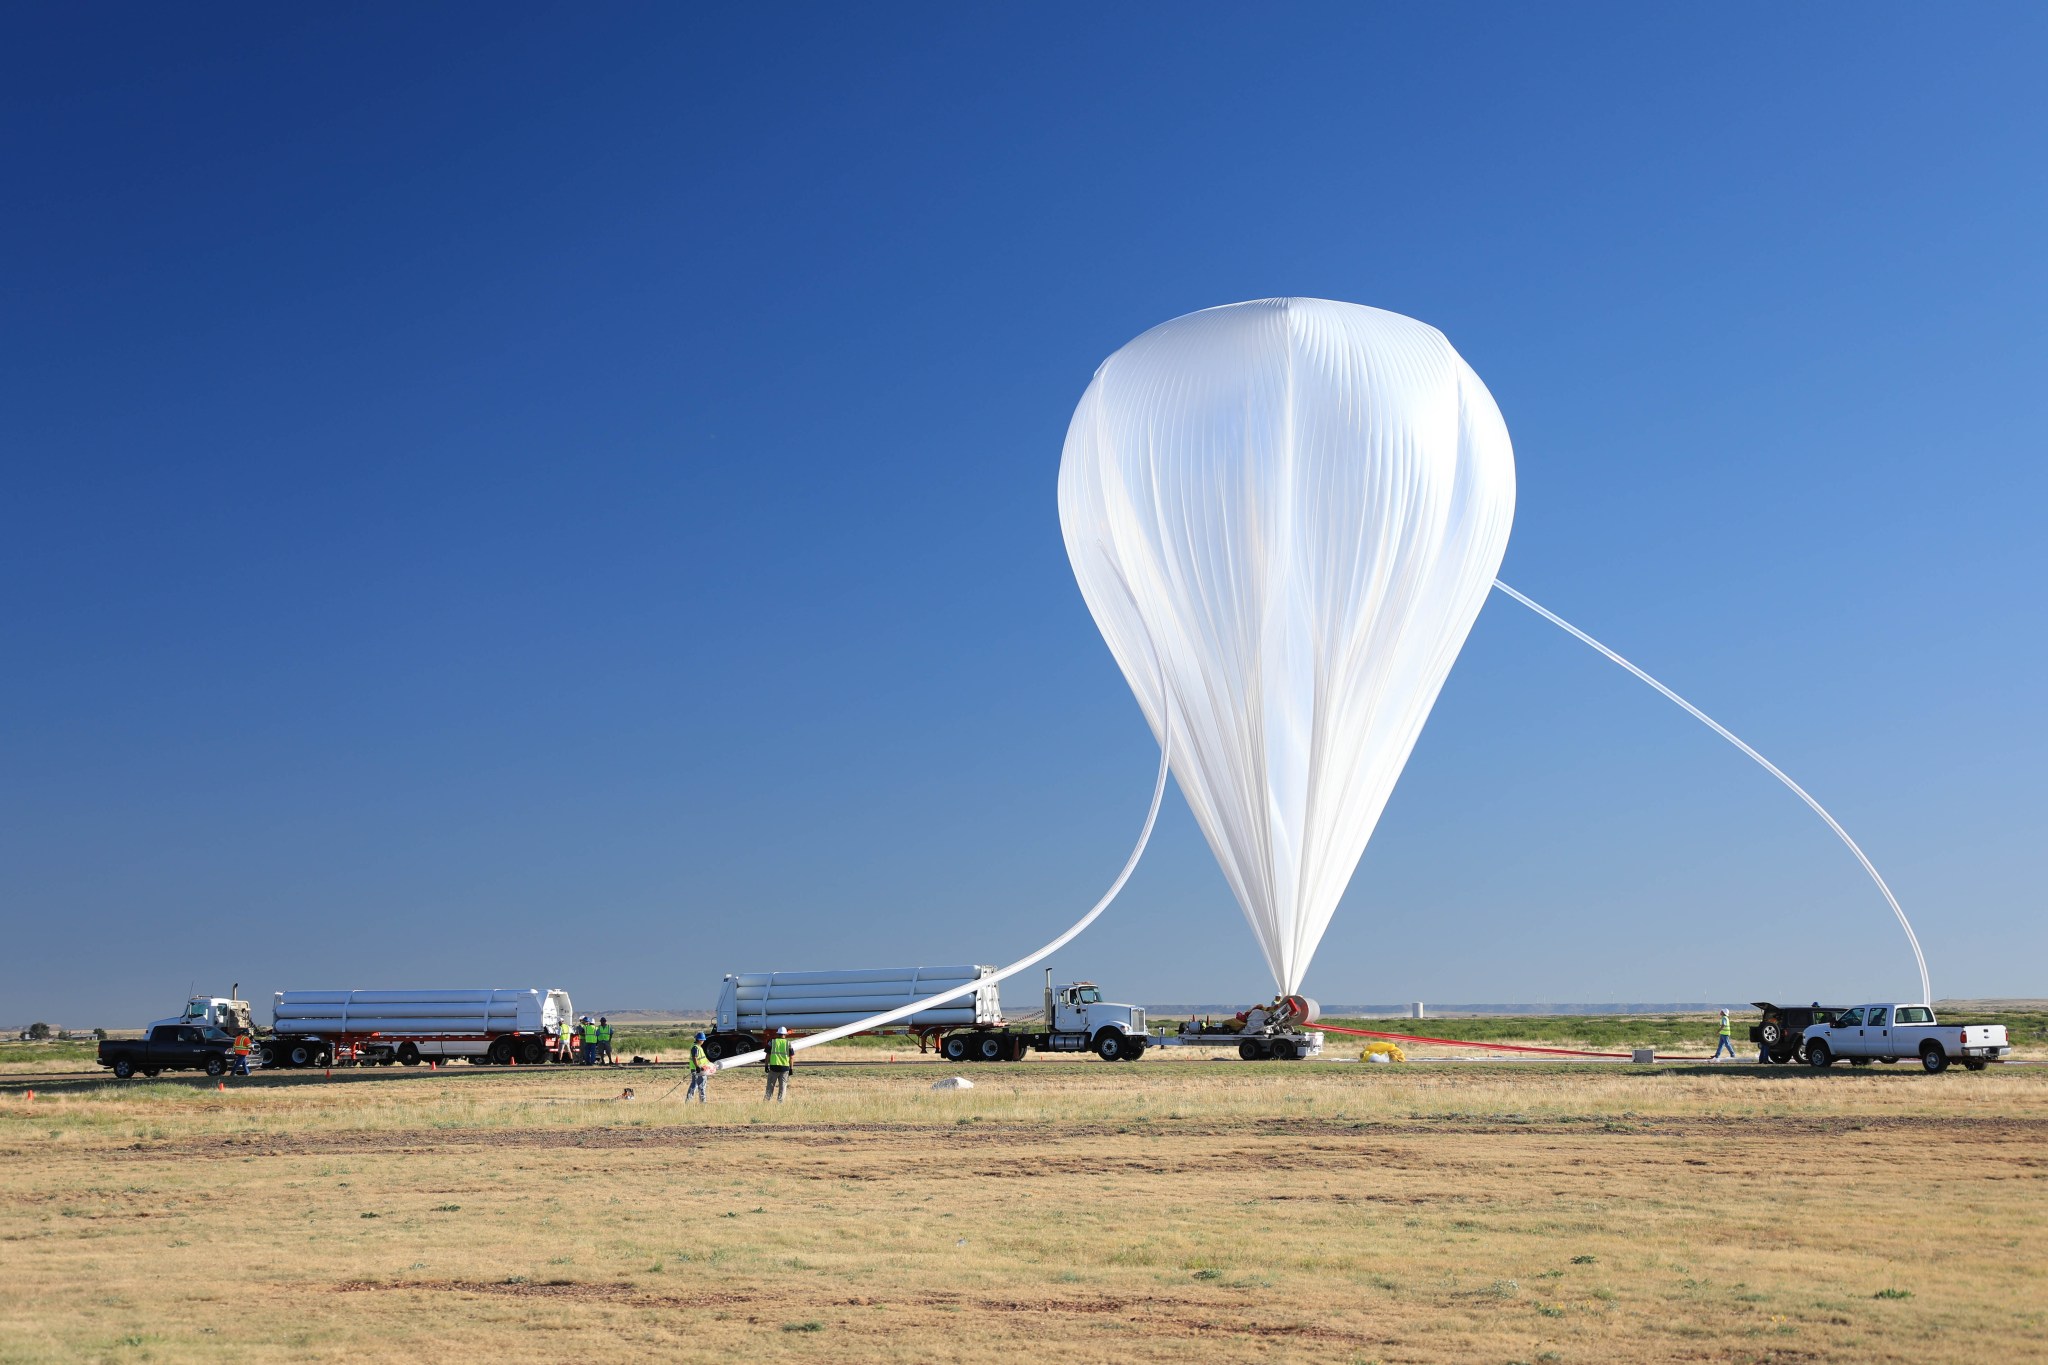 Scientific balloon launch from the ground